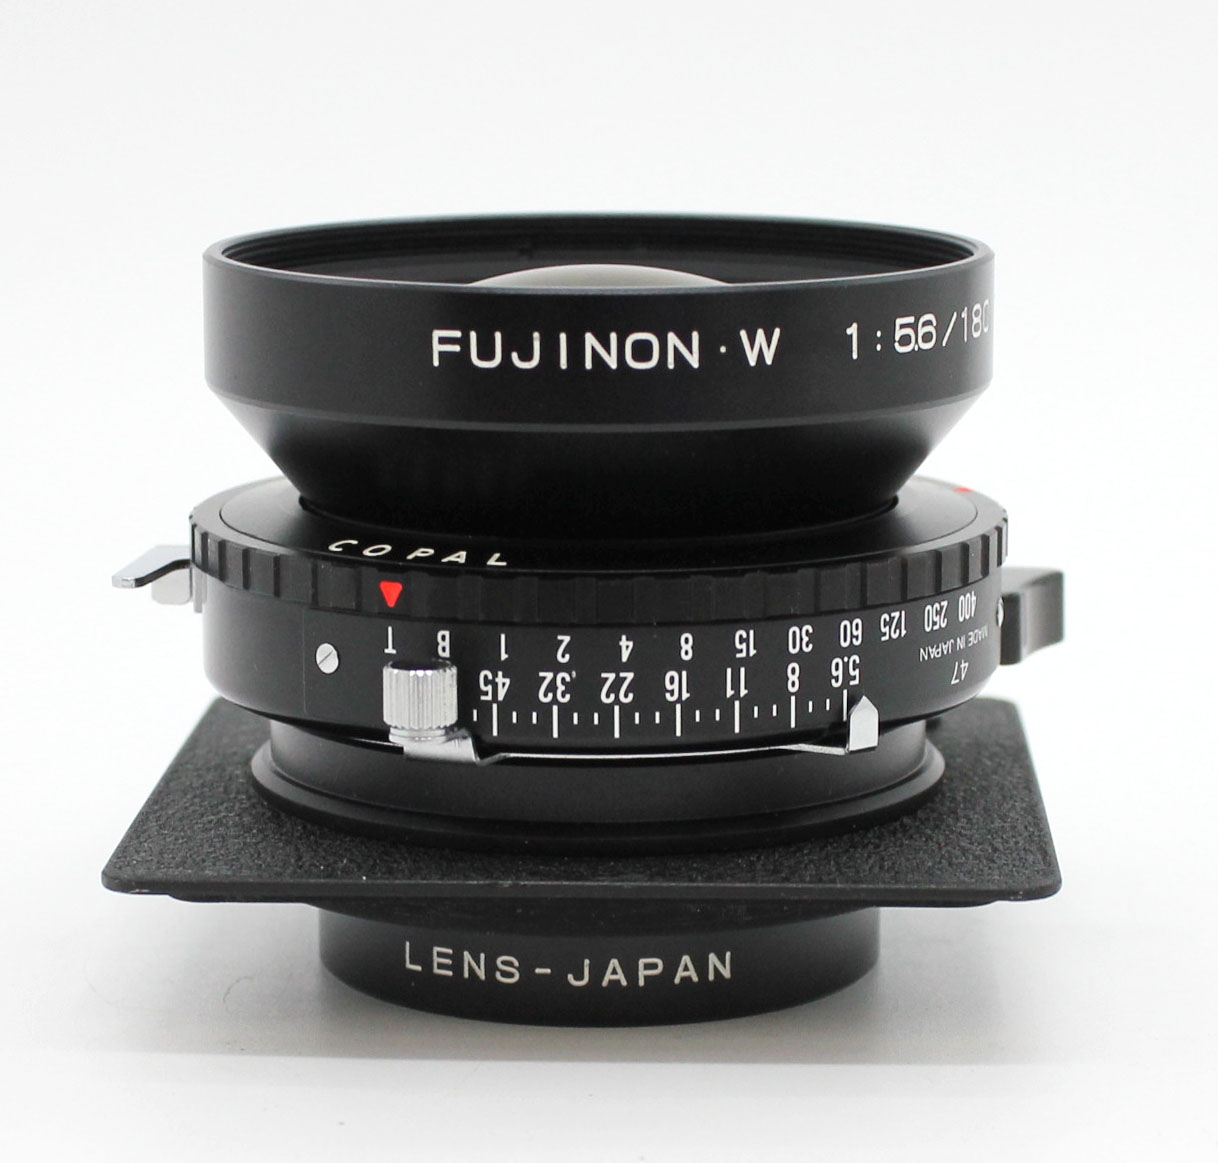  Fuji Fujinon W 180mm F/5.6 4x5 Large Format Lens with Copal Shutter from Japan Photo 6